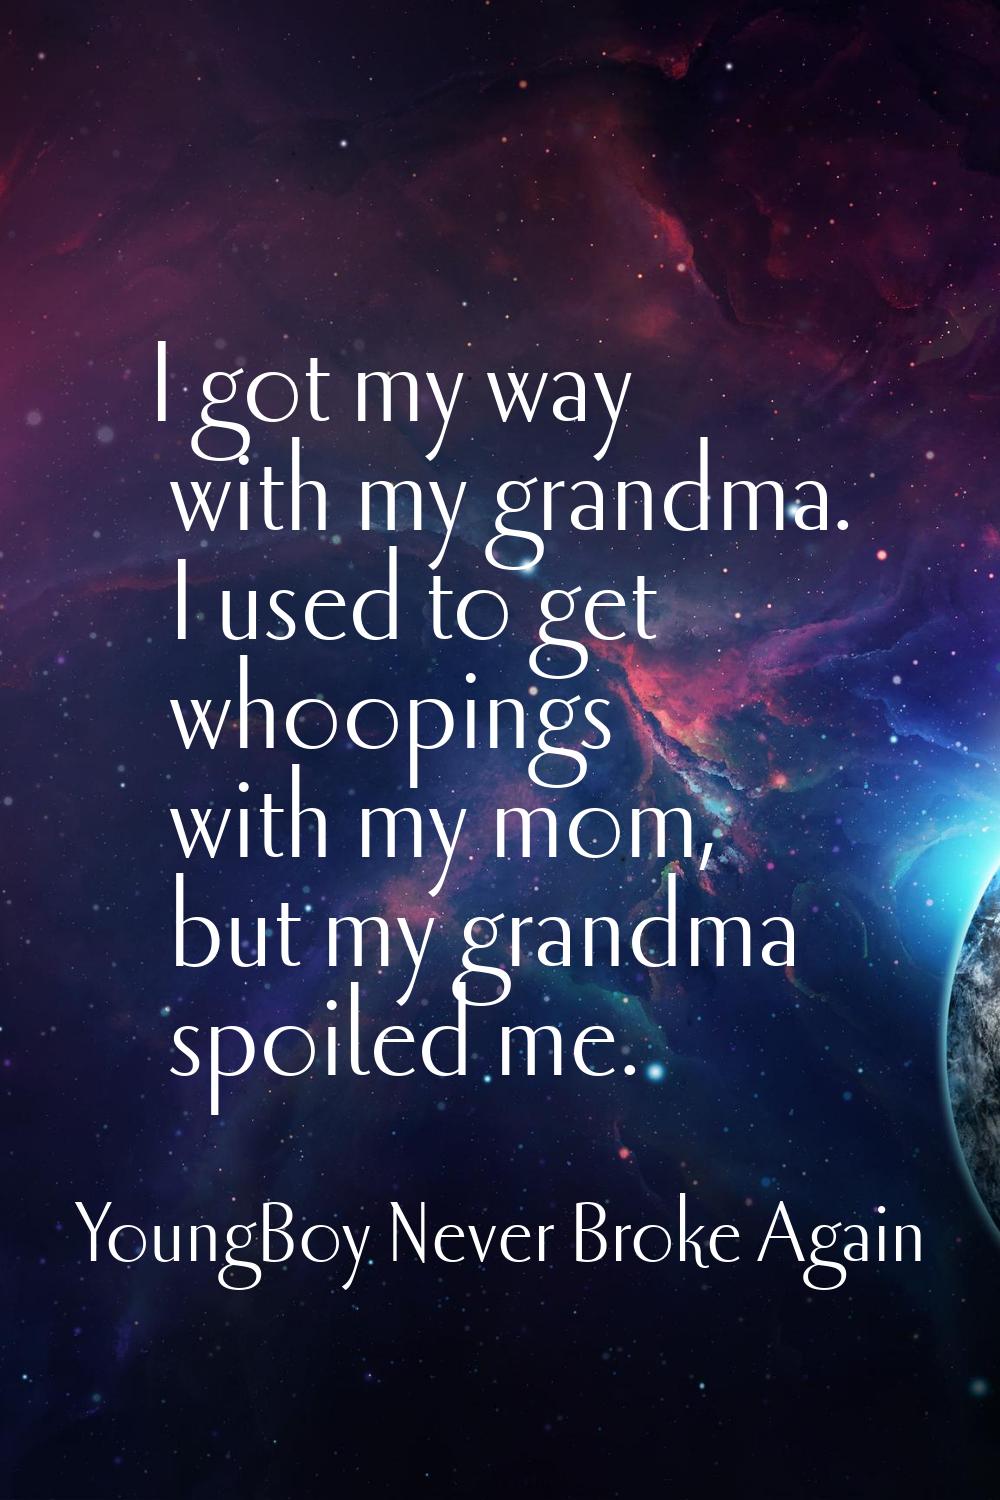 I got my way with my grandma. I used to get whoopings with my mom, but my grandma spoiled me.